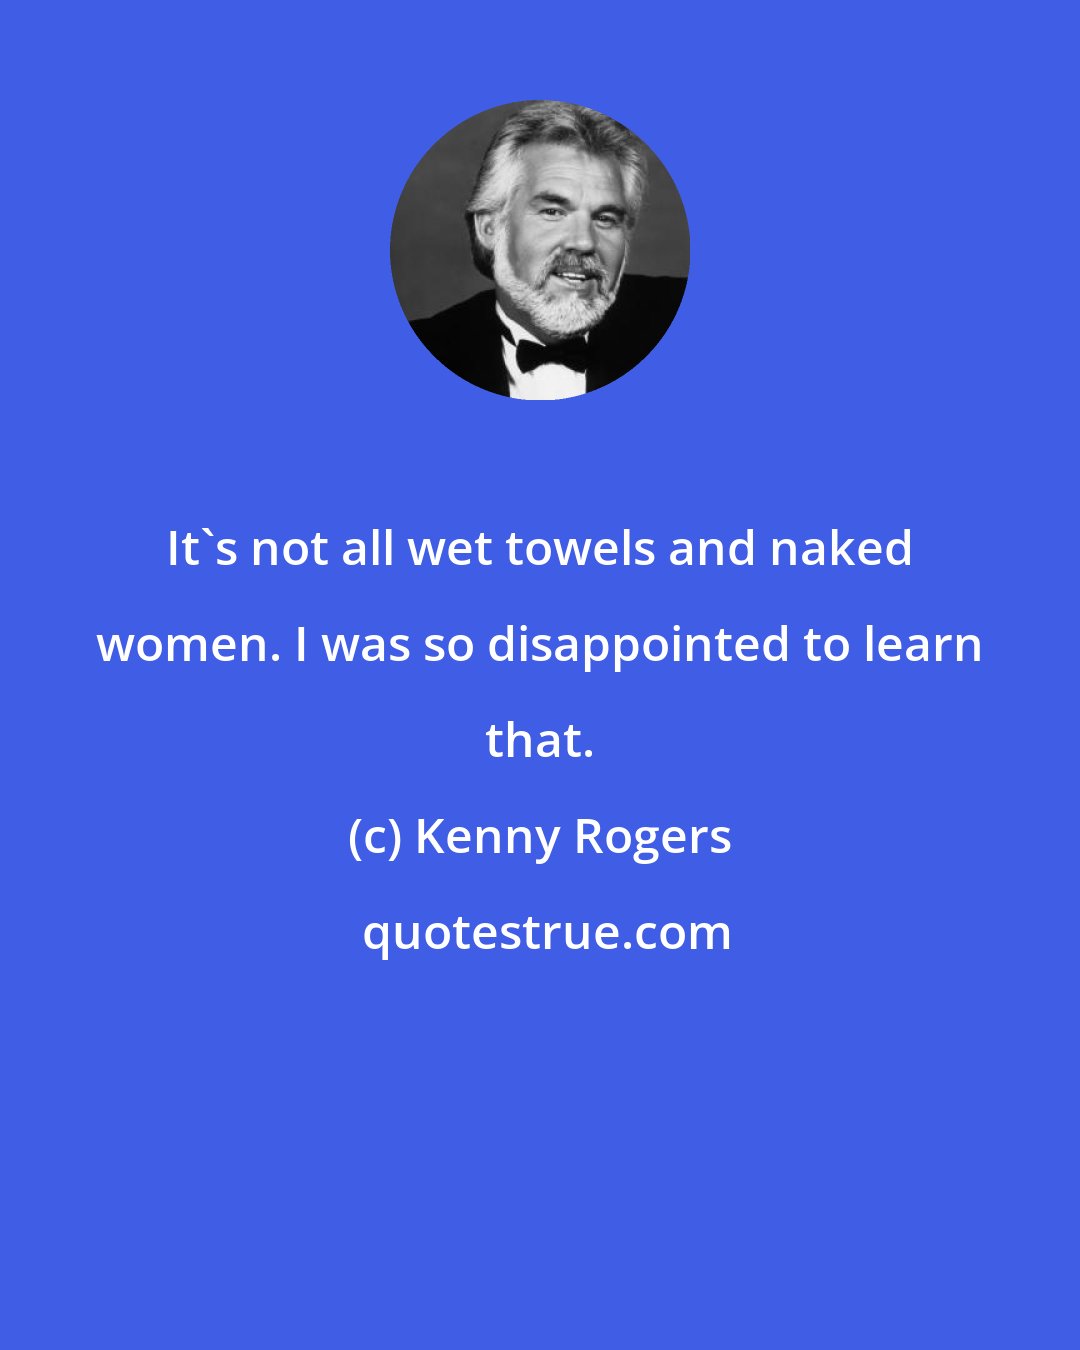 Kenny Rogers: It's not all wet towels and naked women. I was so disappointed to learn that.